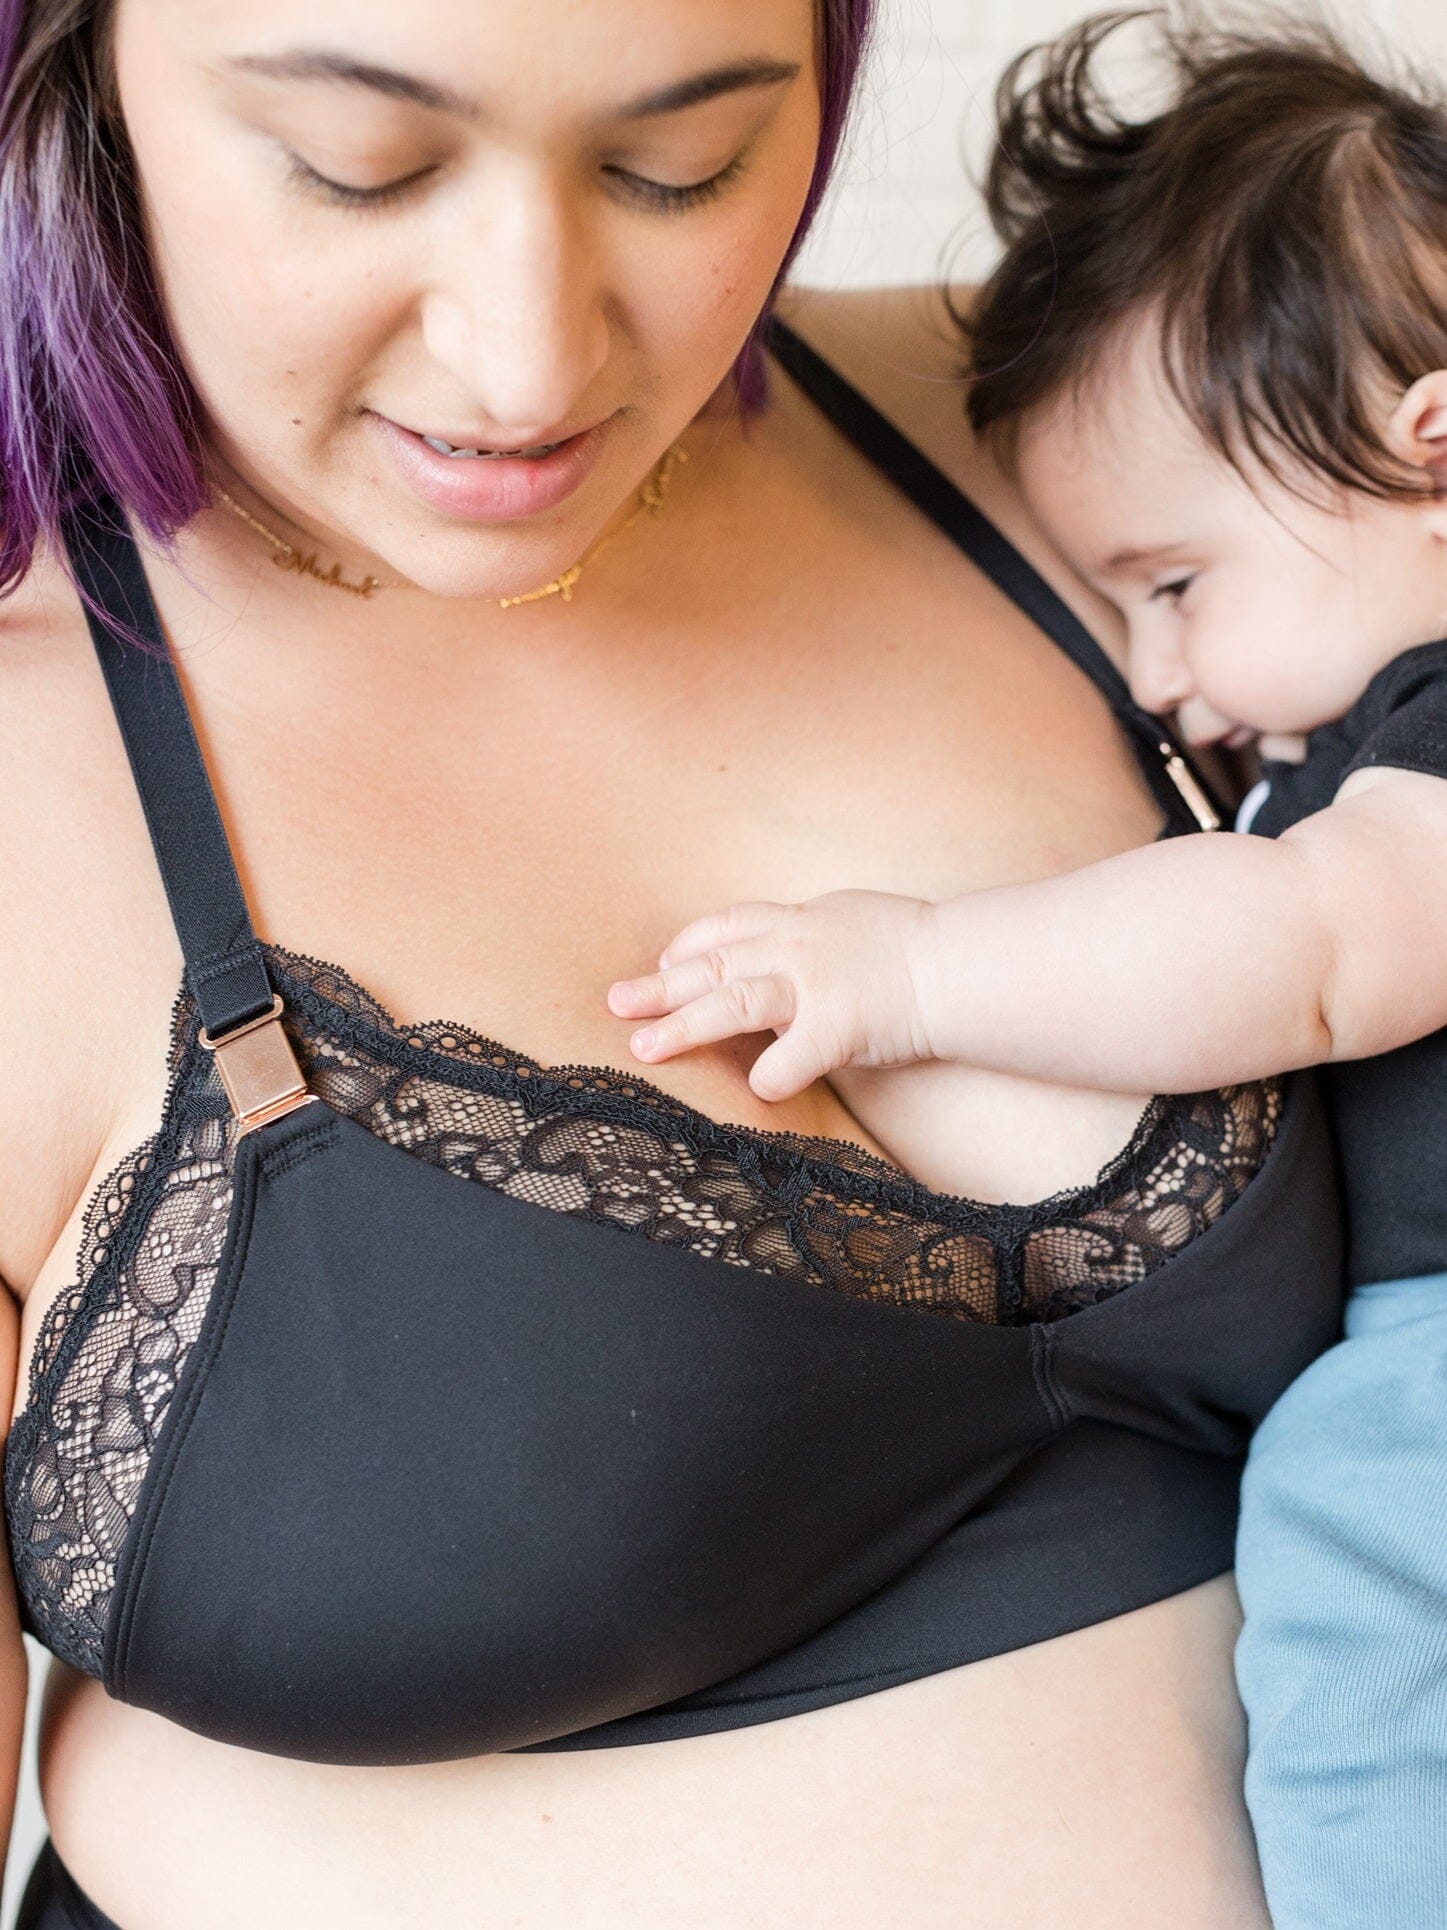 Nursing Bras for New Moms: How to Find the Best Fit & Comfortable Bra